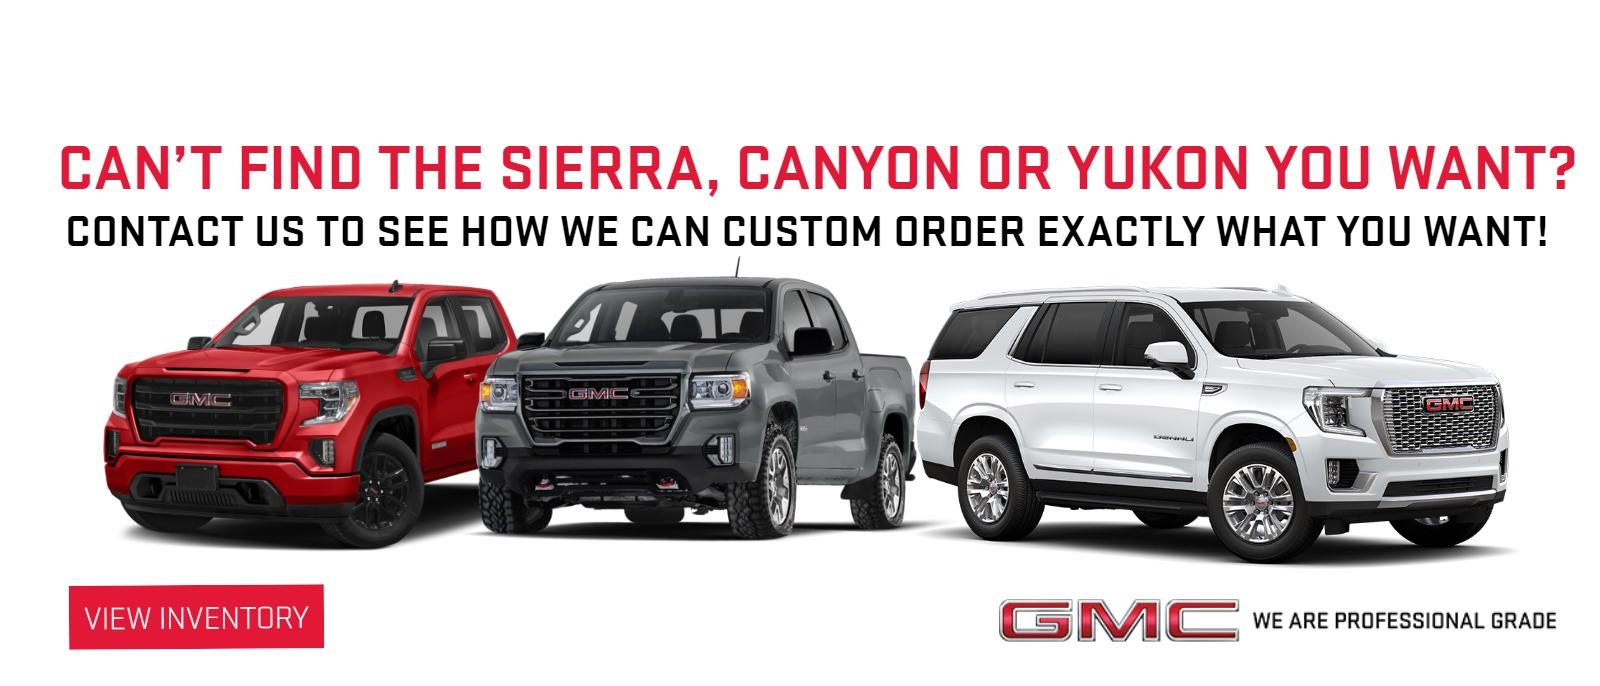 Can’t find the Sierra, Canyon or Yukon you want? Contact us to see how we can custom order exactly what you want!”